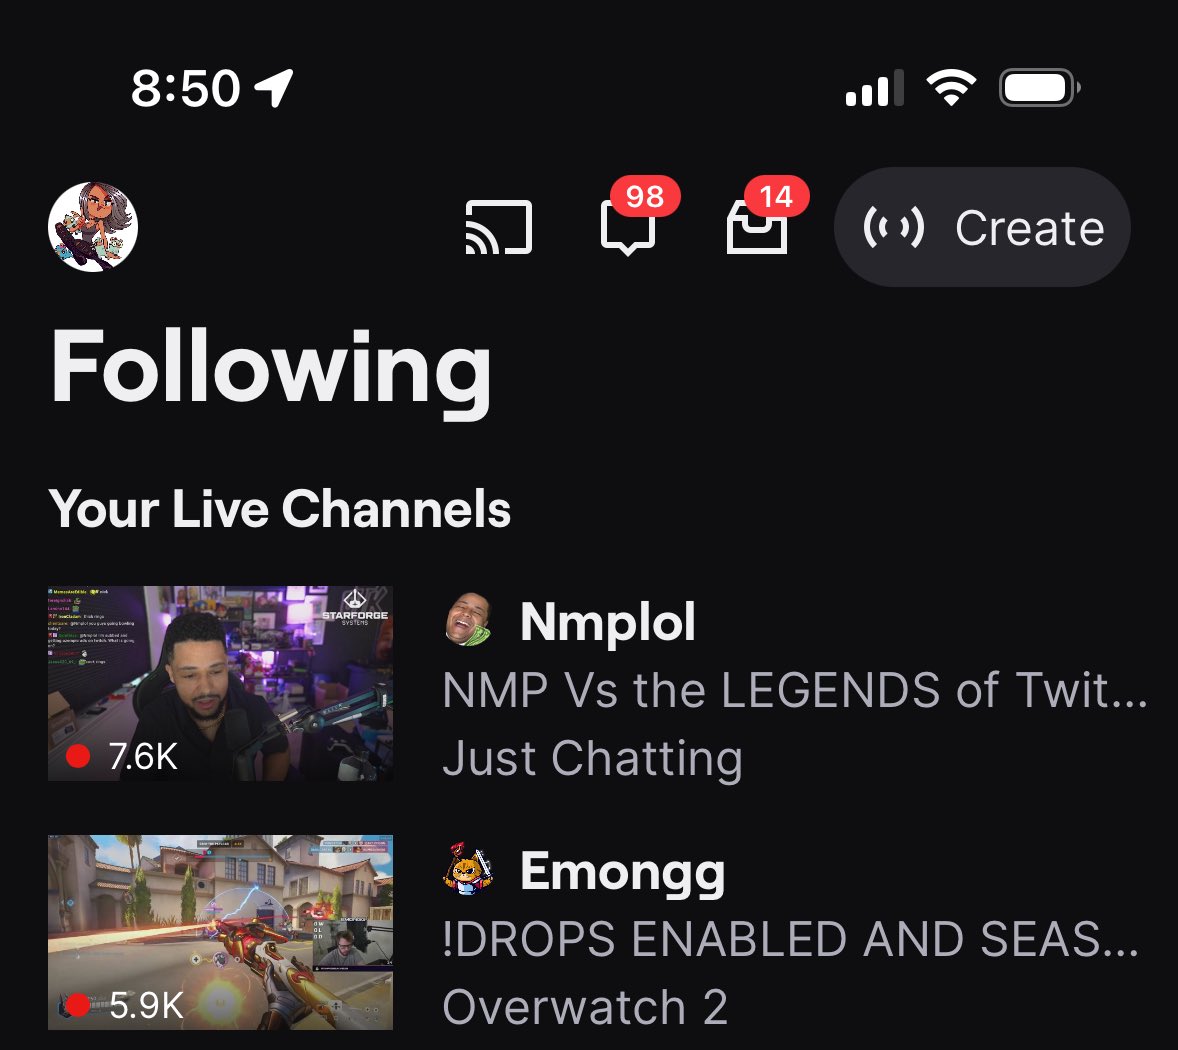 Did twitch already get rid of stories? :/